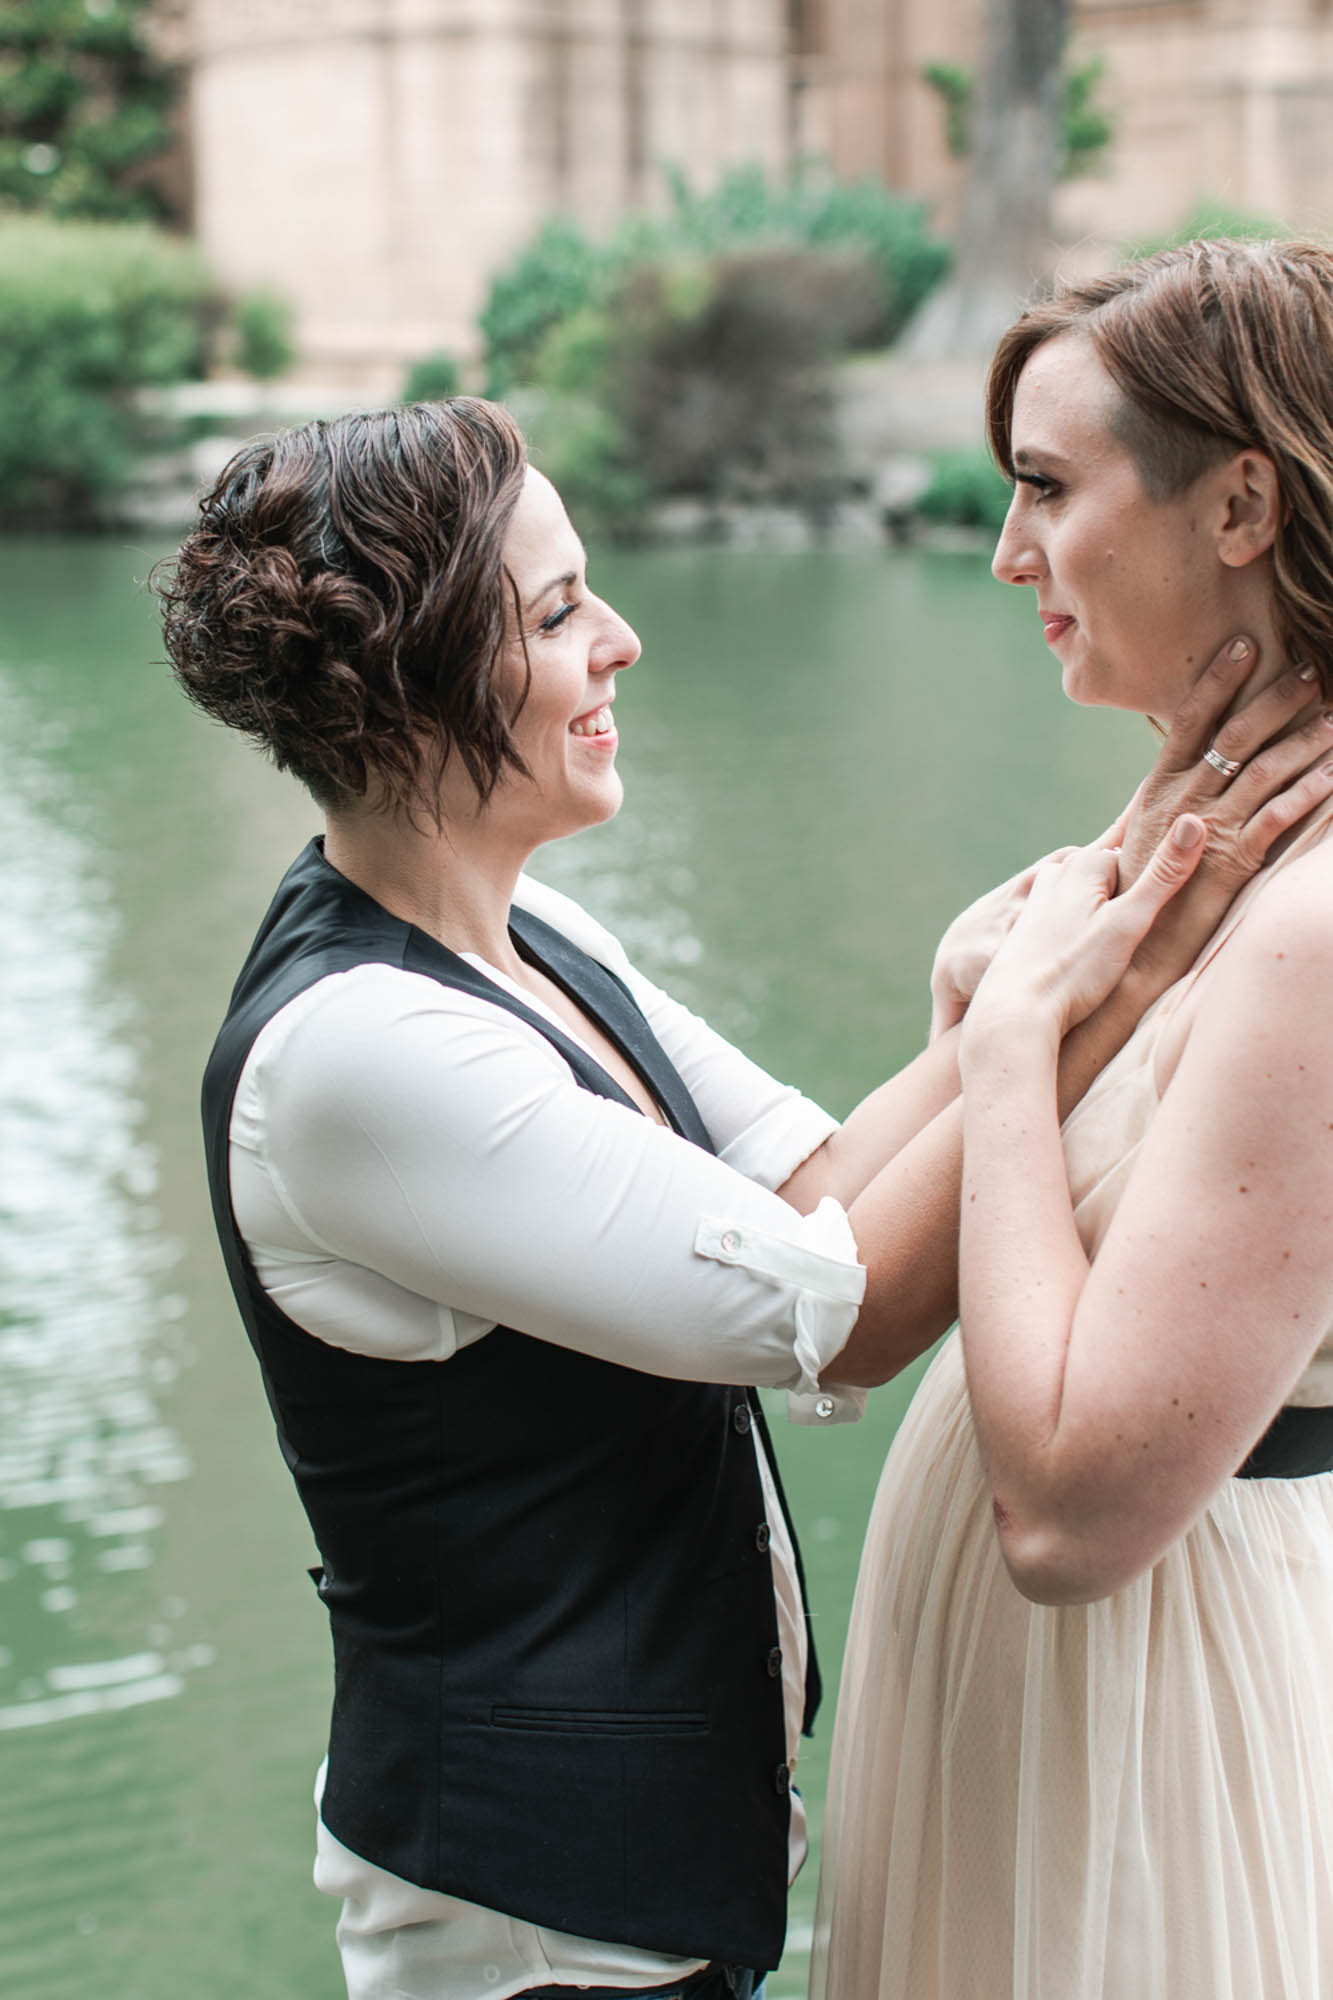 Romantic engagement session at the Palace of Fine Arts | Blue Note Weddings | Featured on Equally Wed, the leading LGBTQ+ wedding magazine